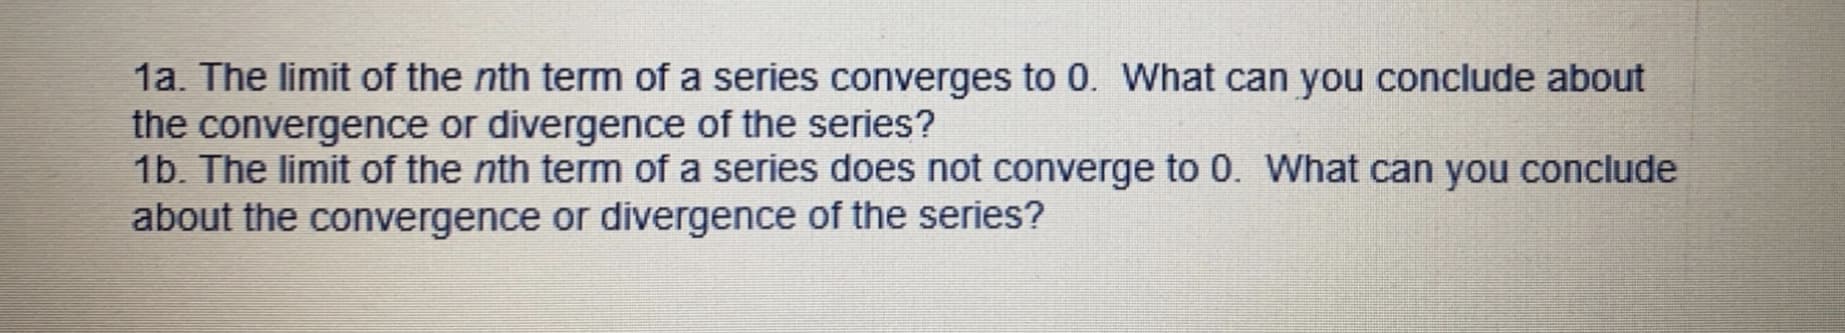 1a. The limit of the nth term of a series converges to 0. What can you conclude about
the convergence or divergence of the series?
1b. The limit of the nth term of a series does not converge to 0. What can you conclude
about the convergence or divergence of the series?
